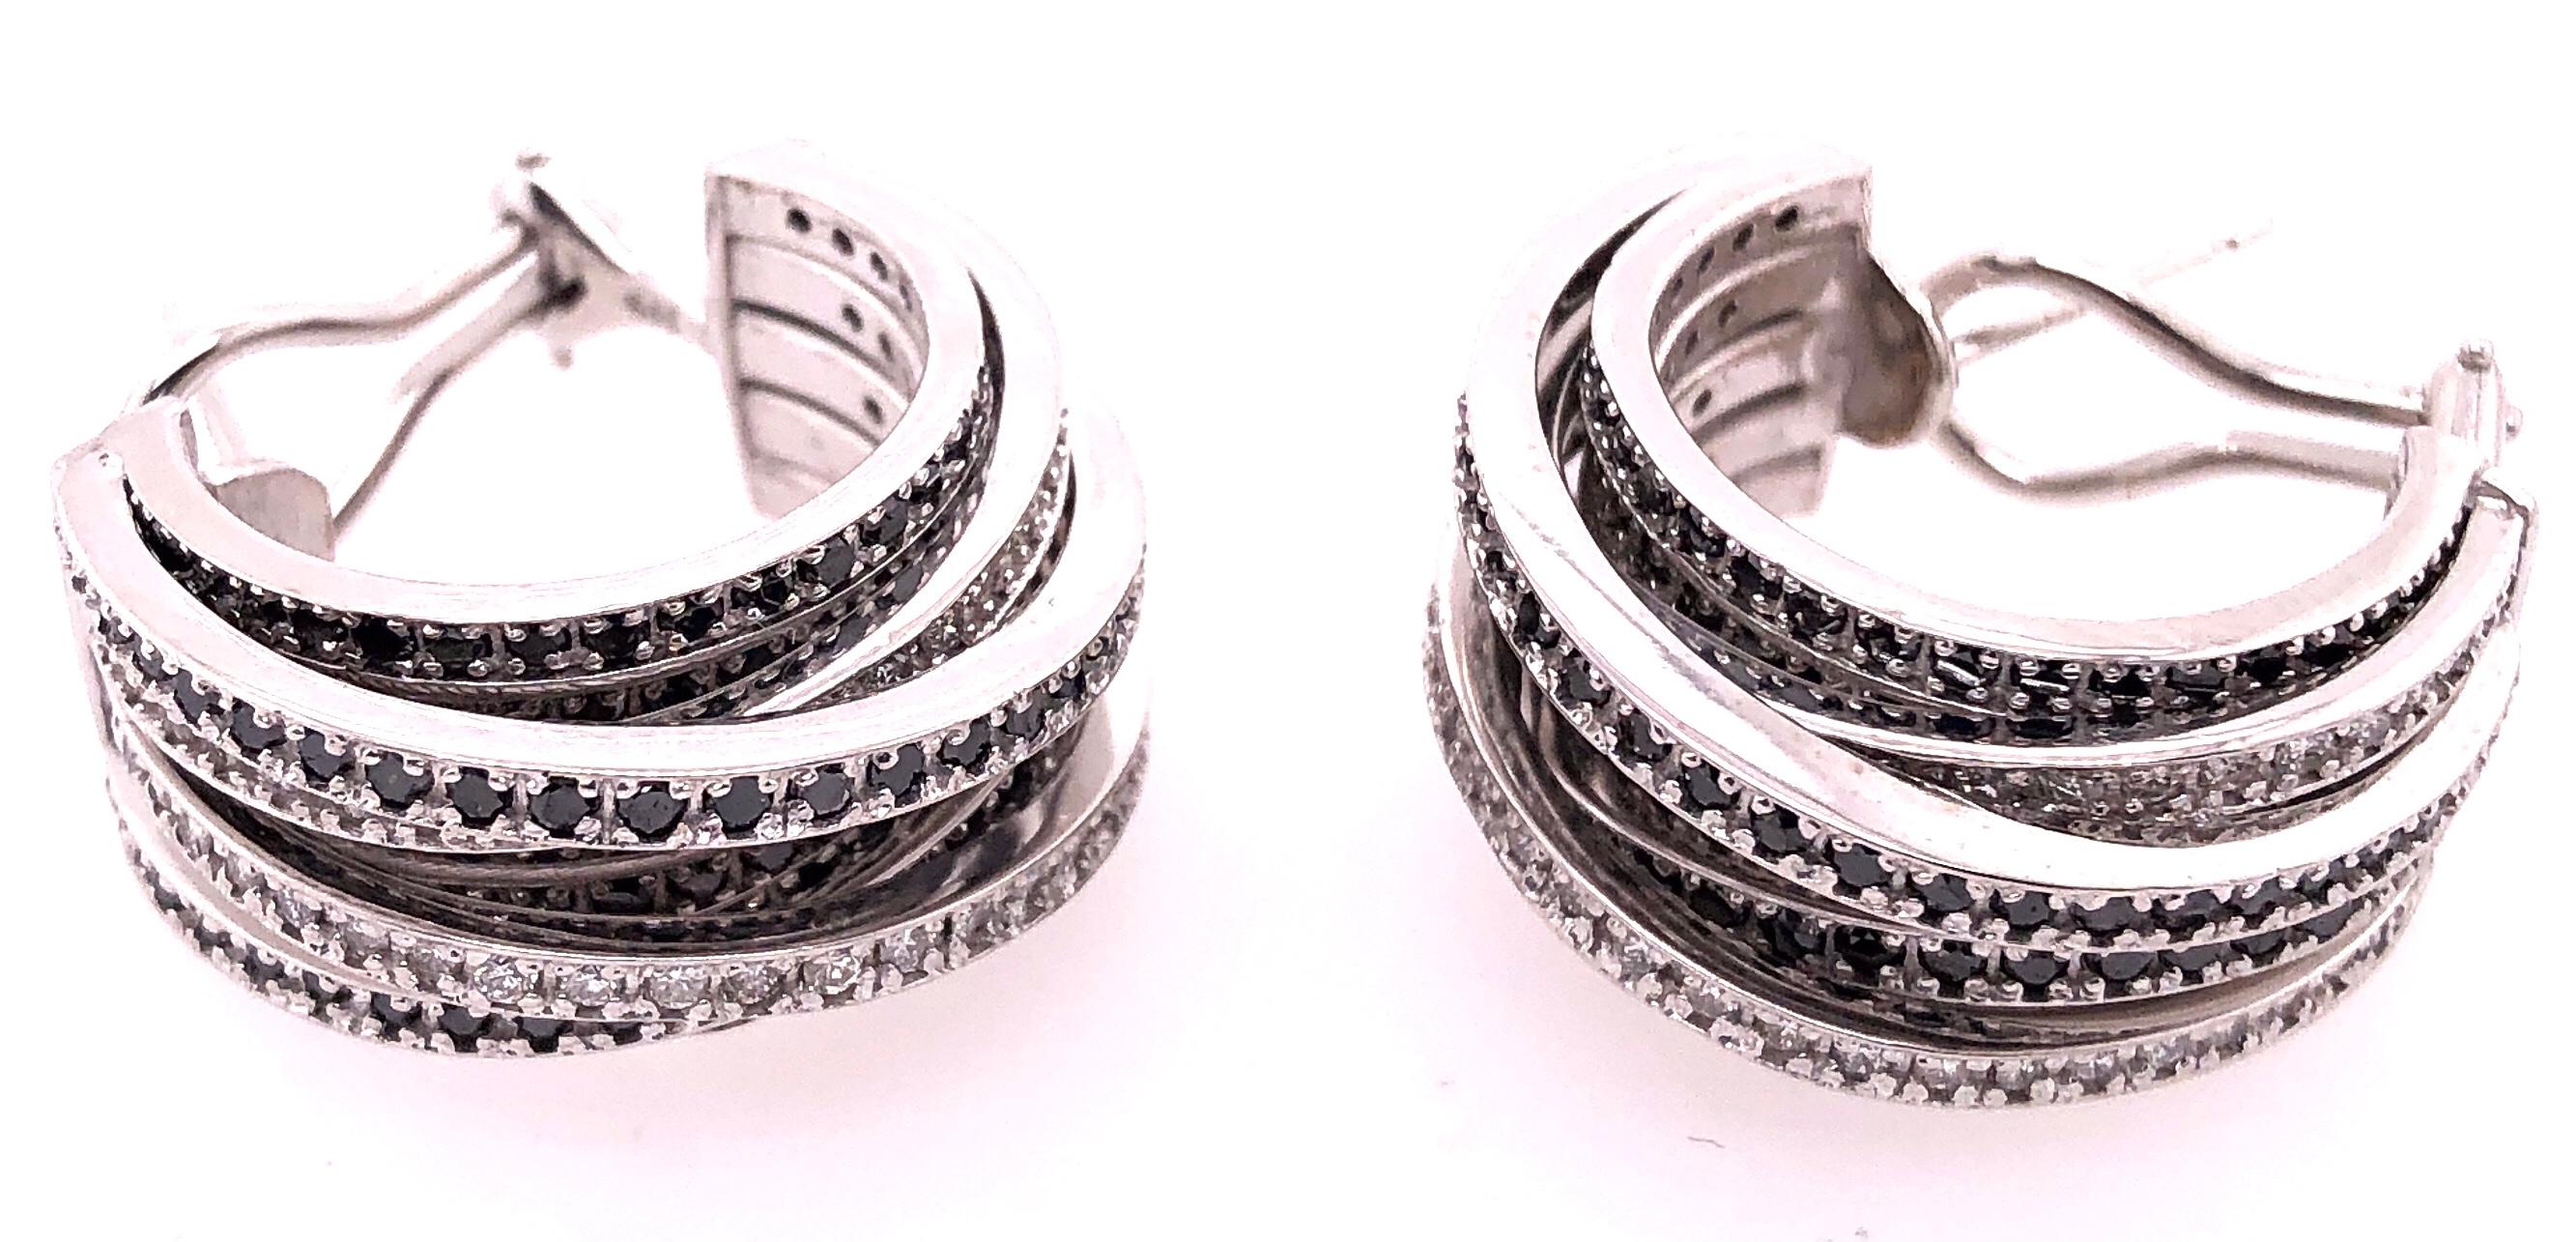 Allegra de Grisogono Style White and Colored Enhanced Black Diamond Earrings In Good Condition For Sale In Stamford, CT